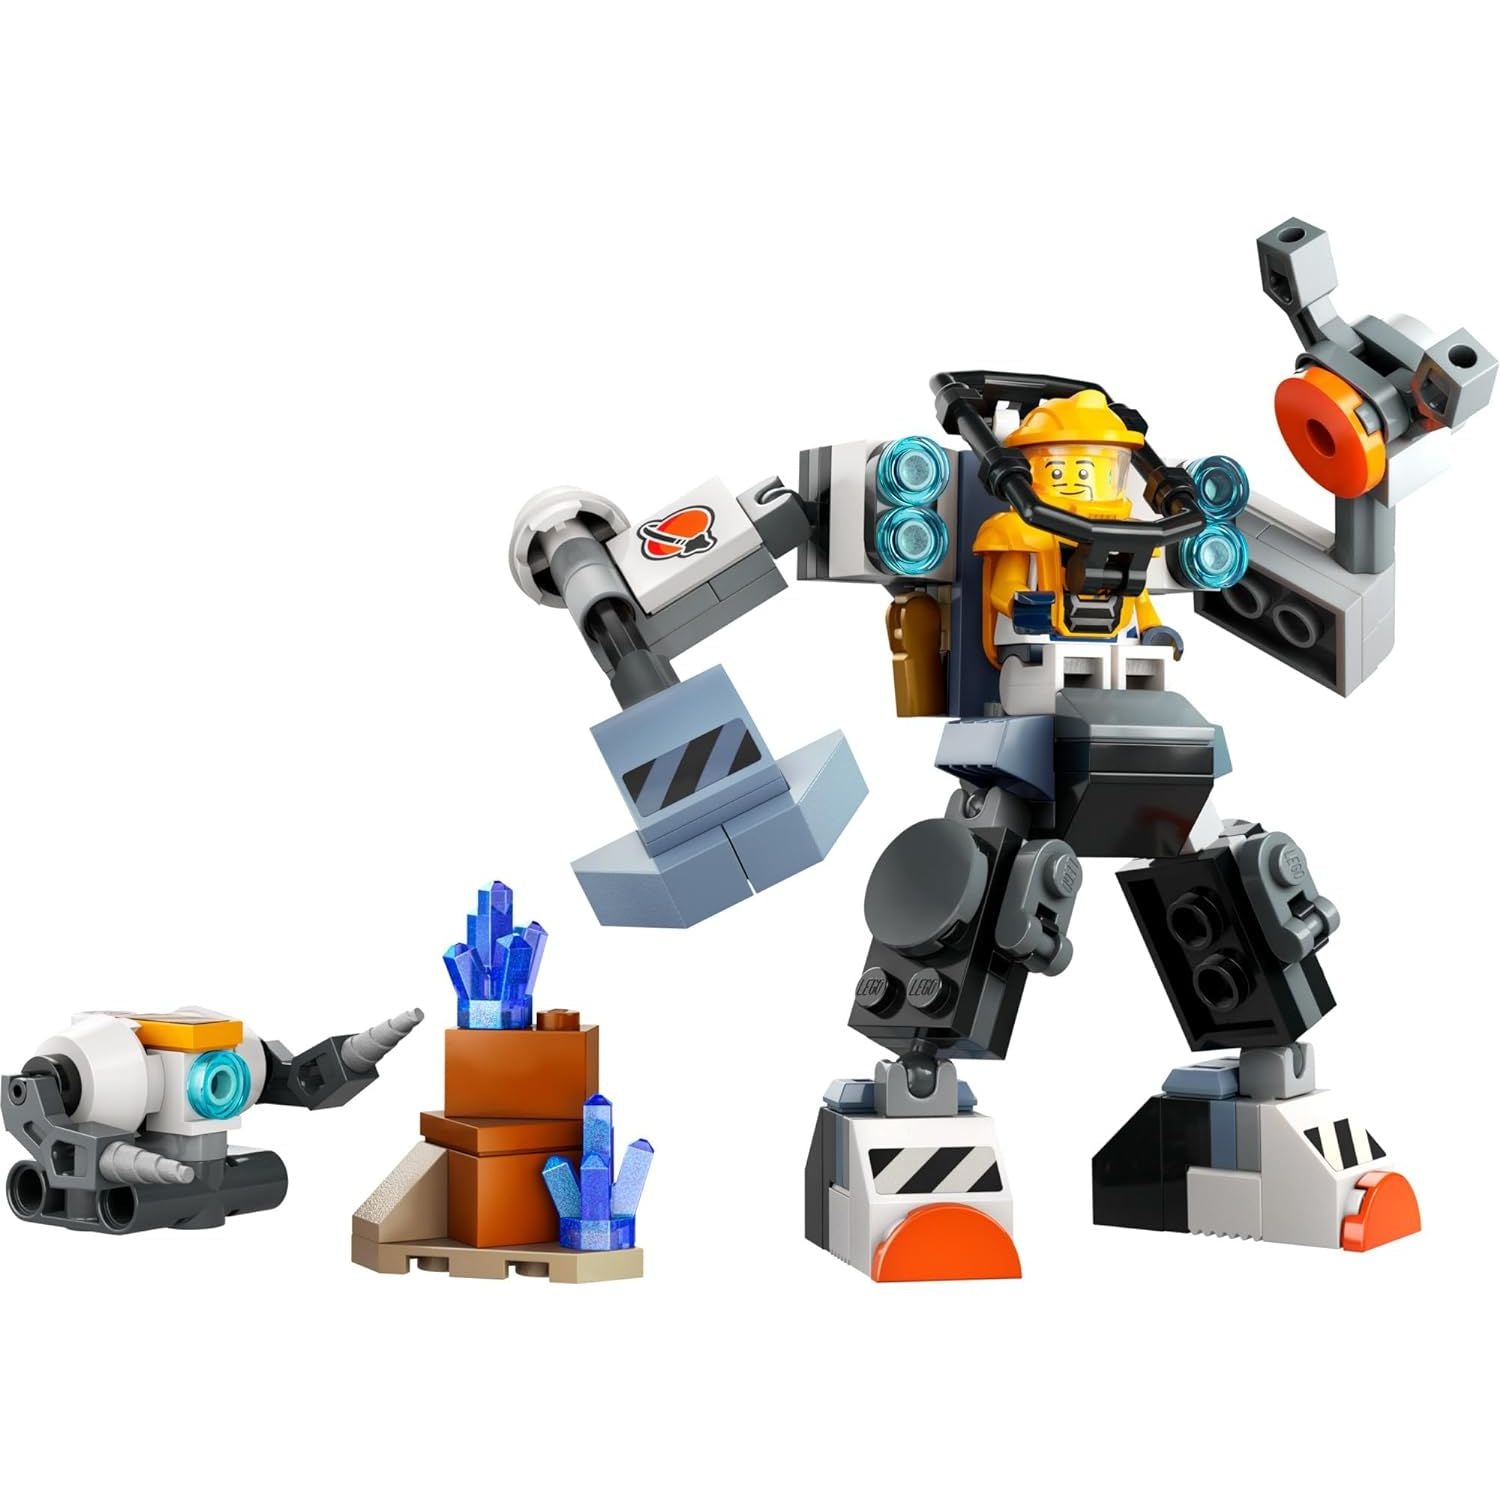 LEGO 60428 City Space Construction Mech Suit Building Set, Fun Space Toy for Kids Ages 6 and Up, Space Gift Idea for Boys and Girls Who Love Imaginative Play, Includes Pilot Minifigure and Robot Toy.